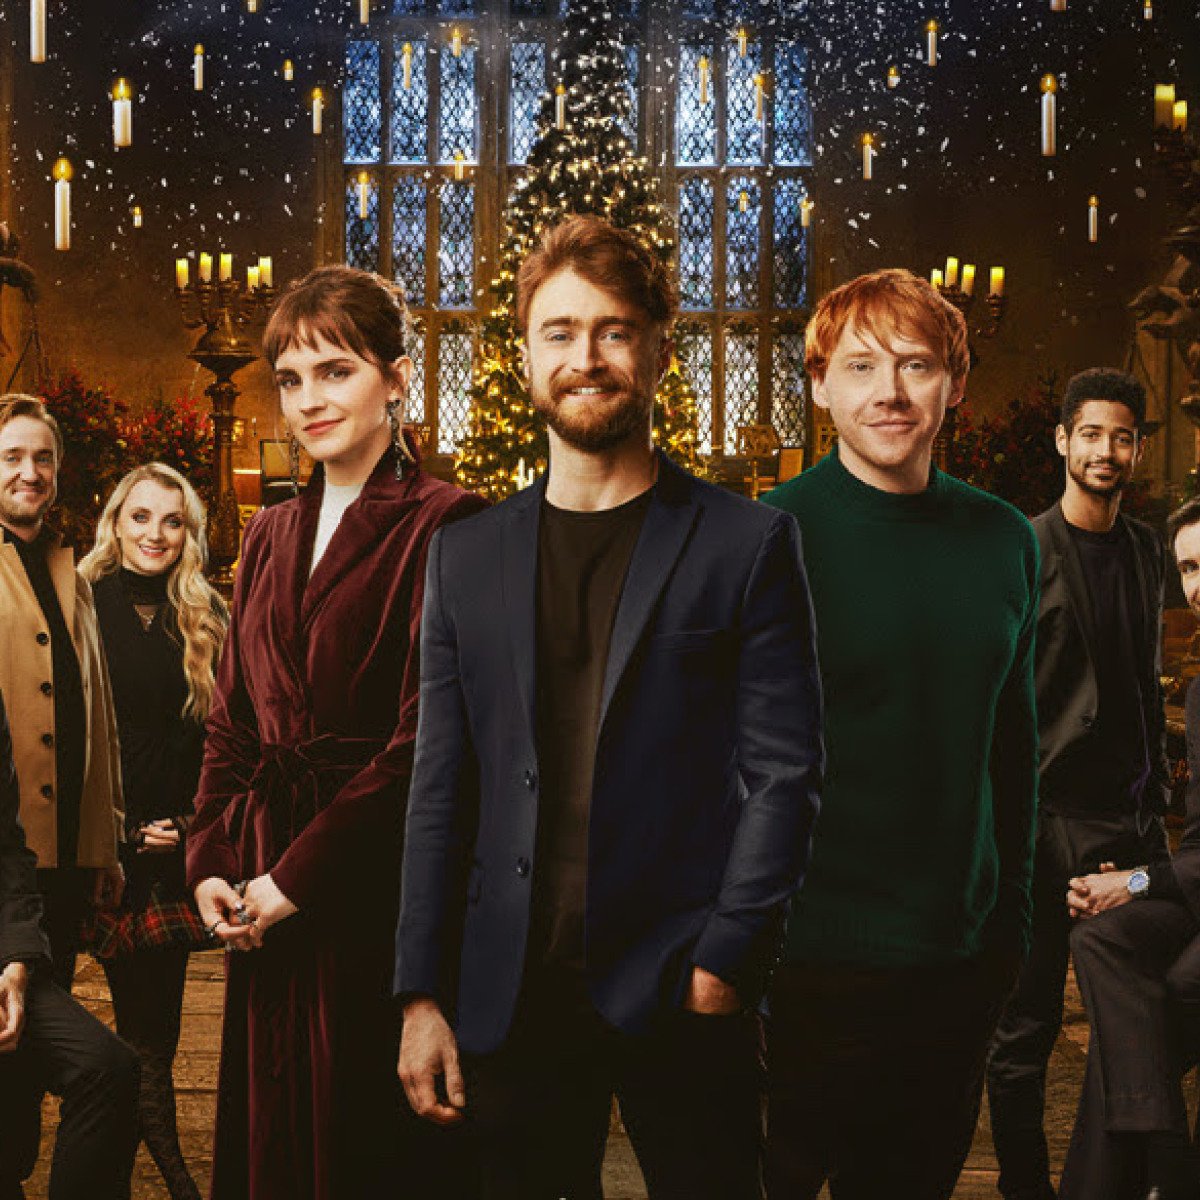 The Harry Potter Cast: Exploring Their Directing and Producing Careers